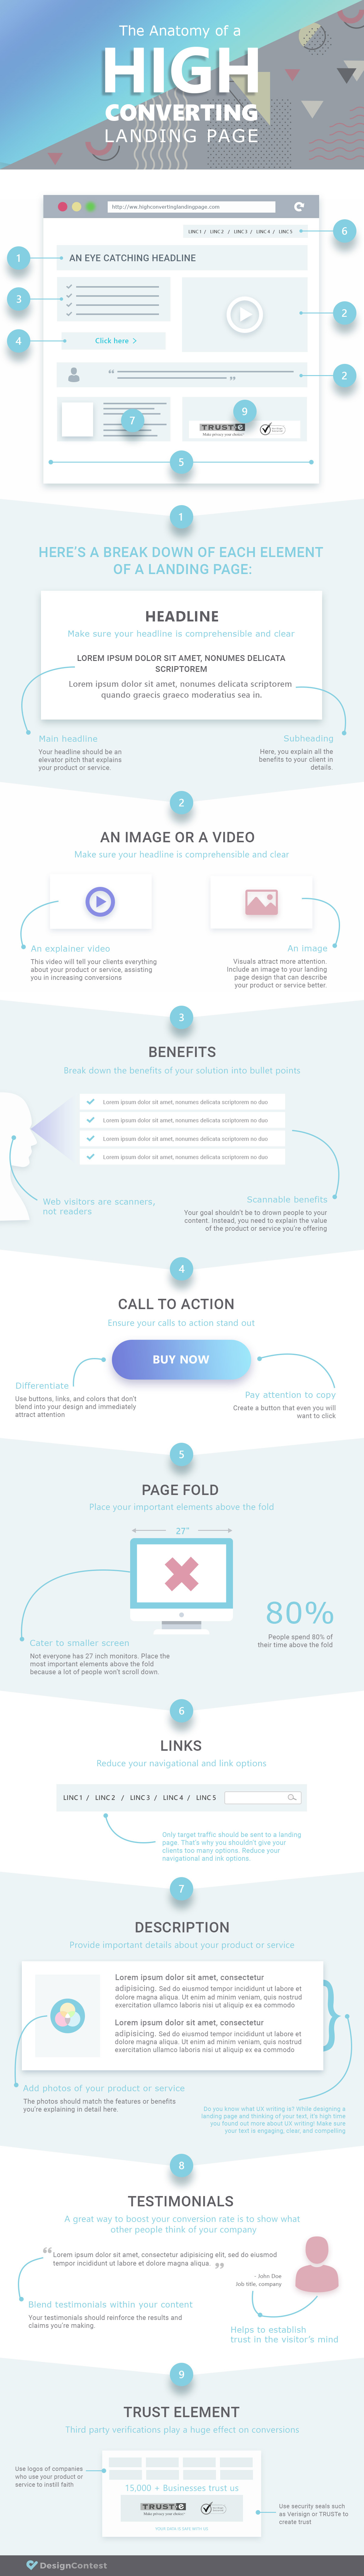 landing page design infographic